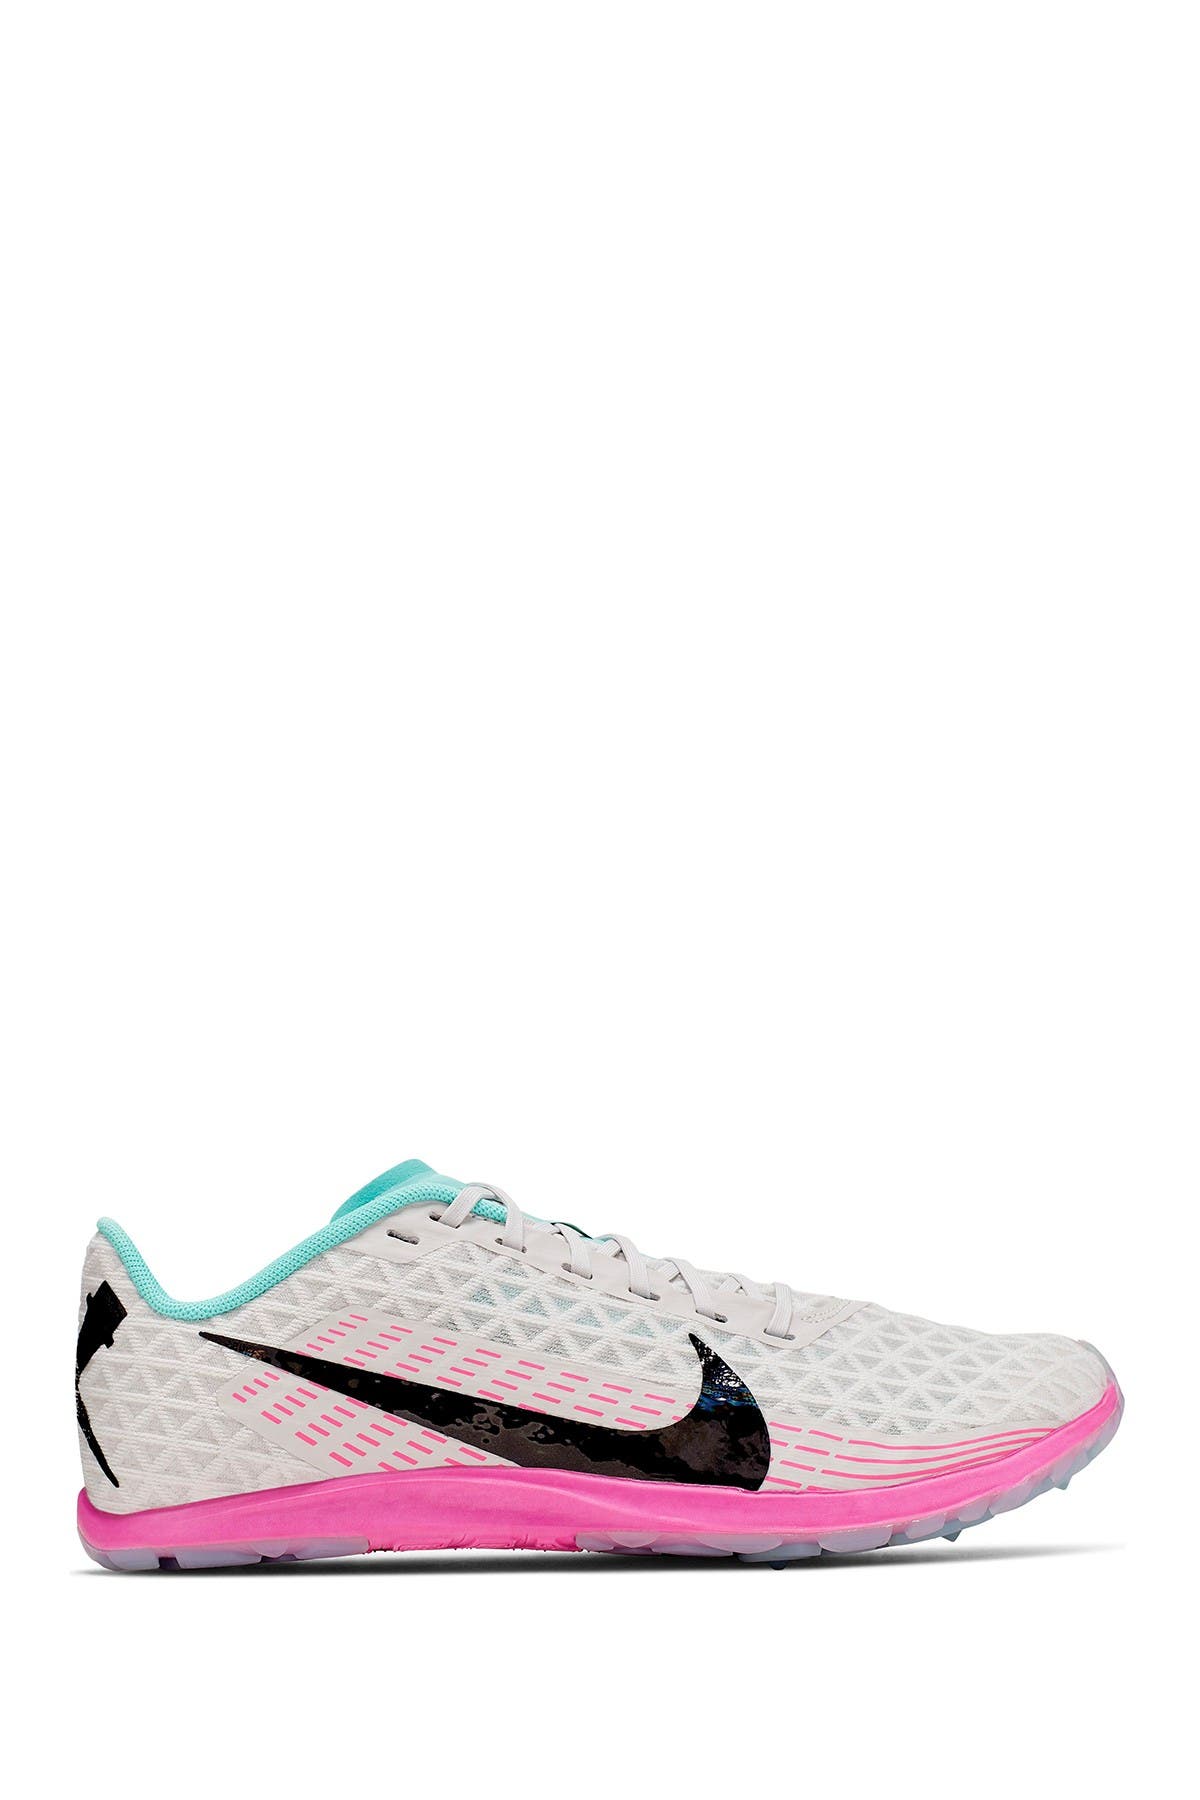 nike women's zoom rival waffle cross country shoes